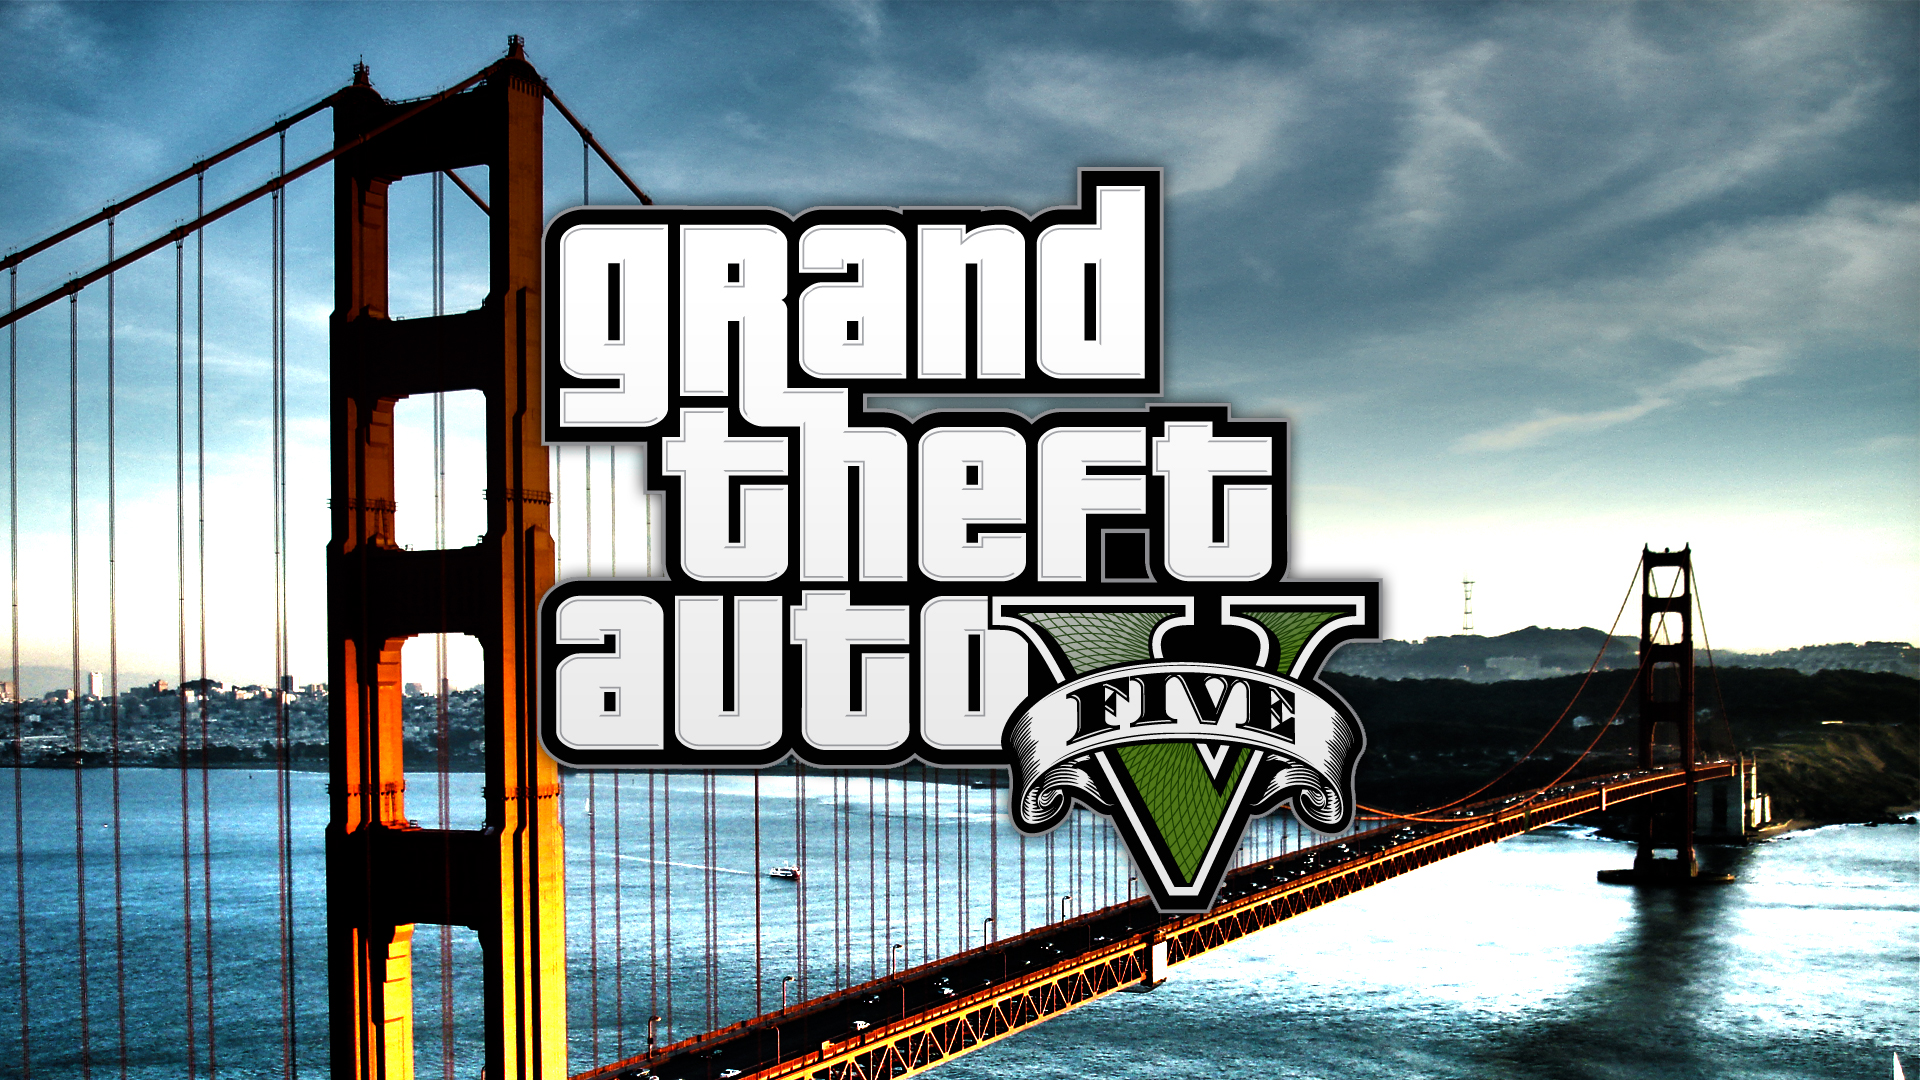 Gta Wallpaper For Desktop And You Like Grand Theft Auto